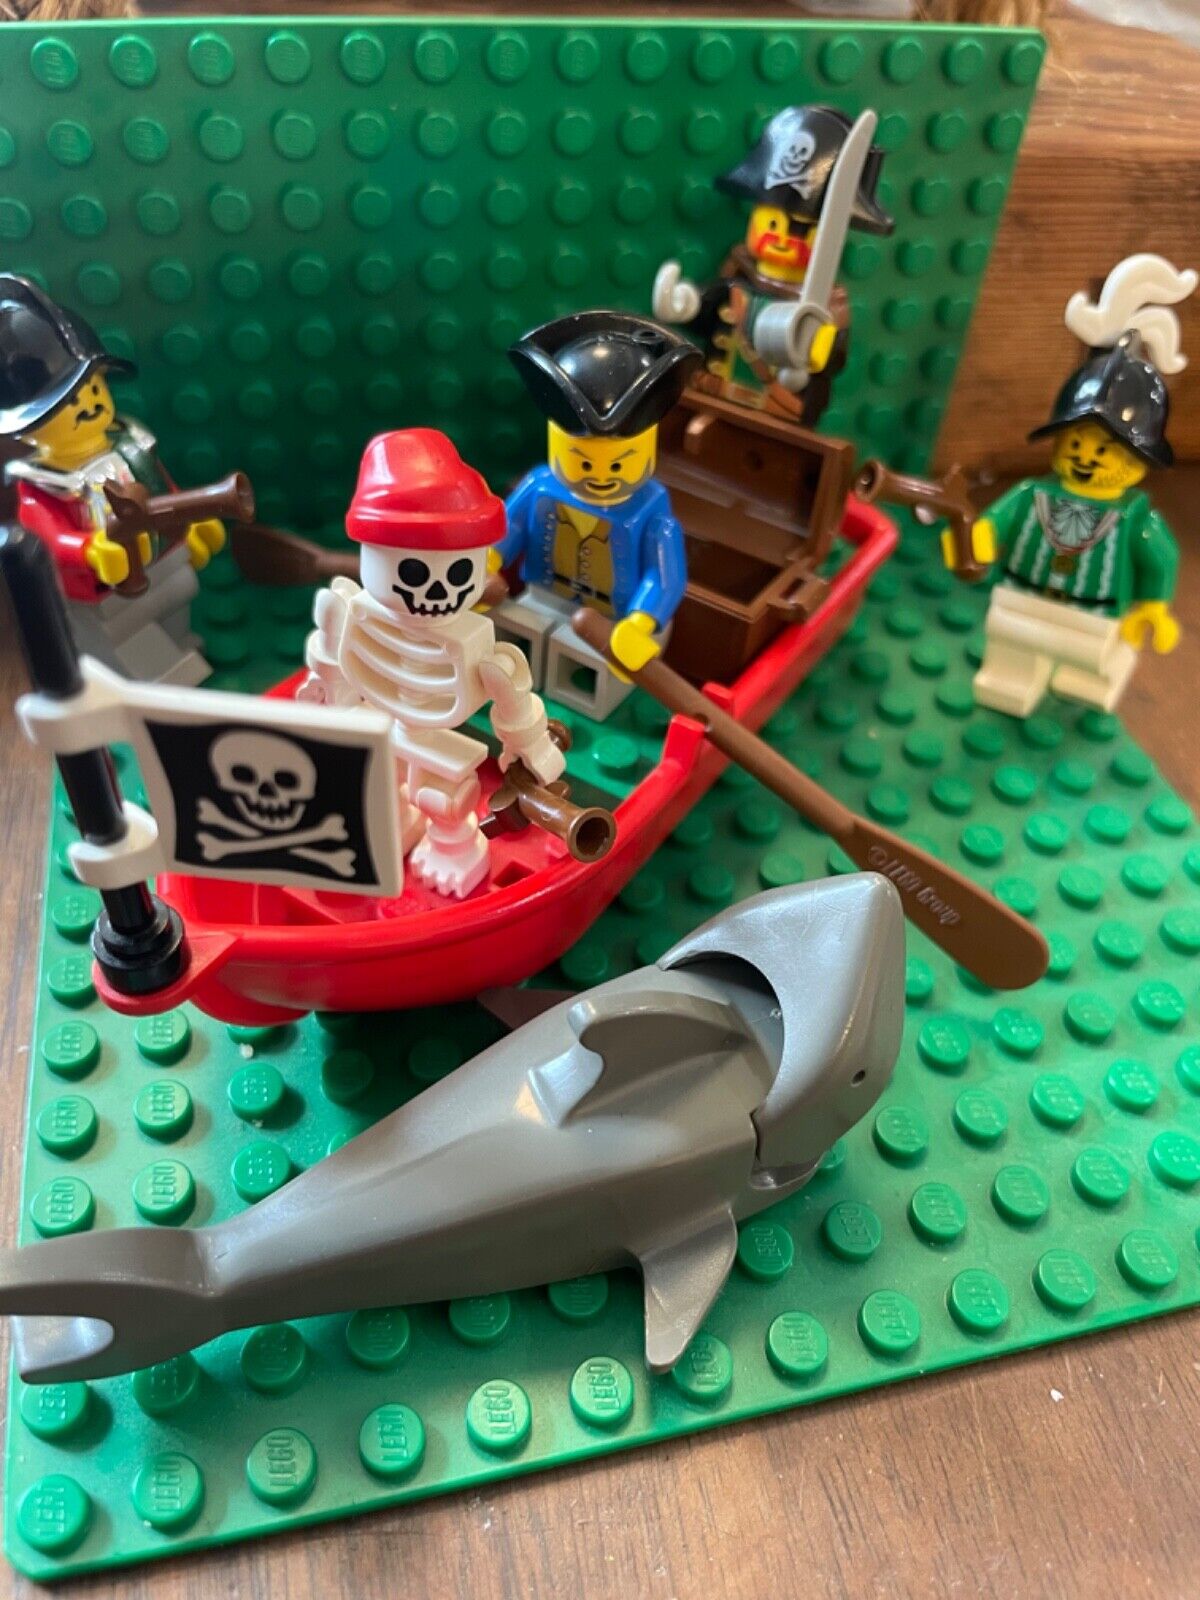 LEGO Pirates: Buccaneers (6204) almost complete with added boat, shark, flag